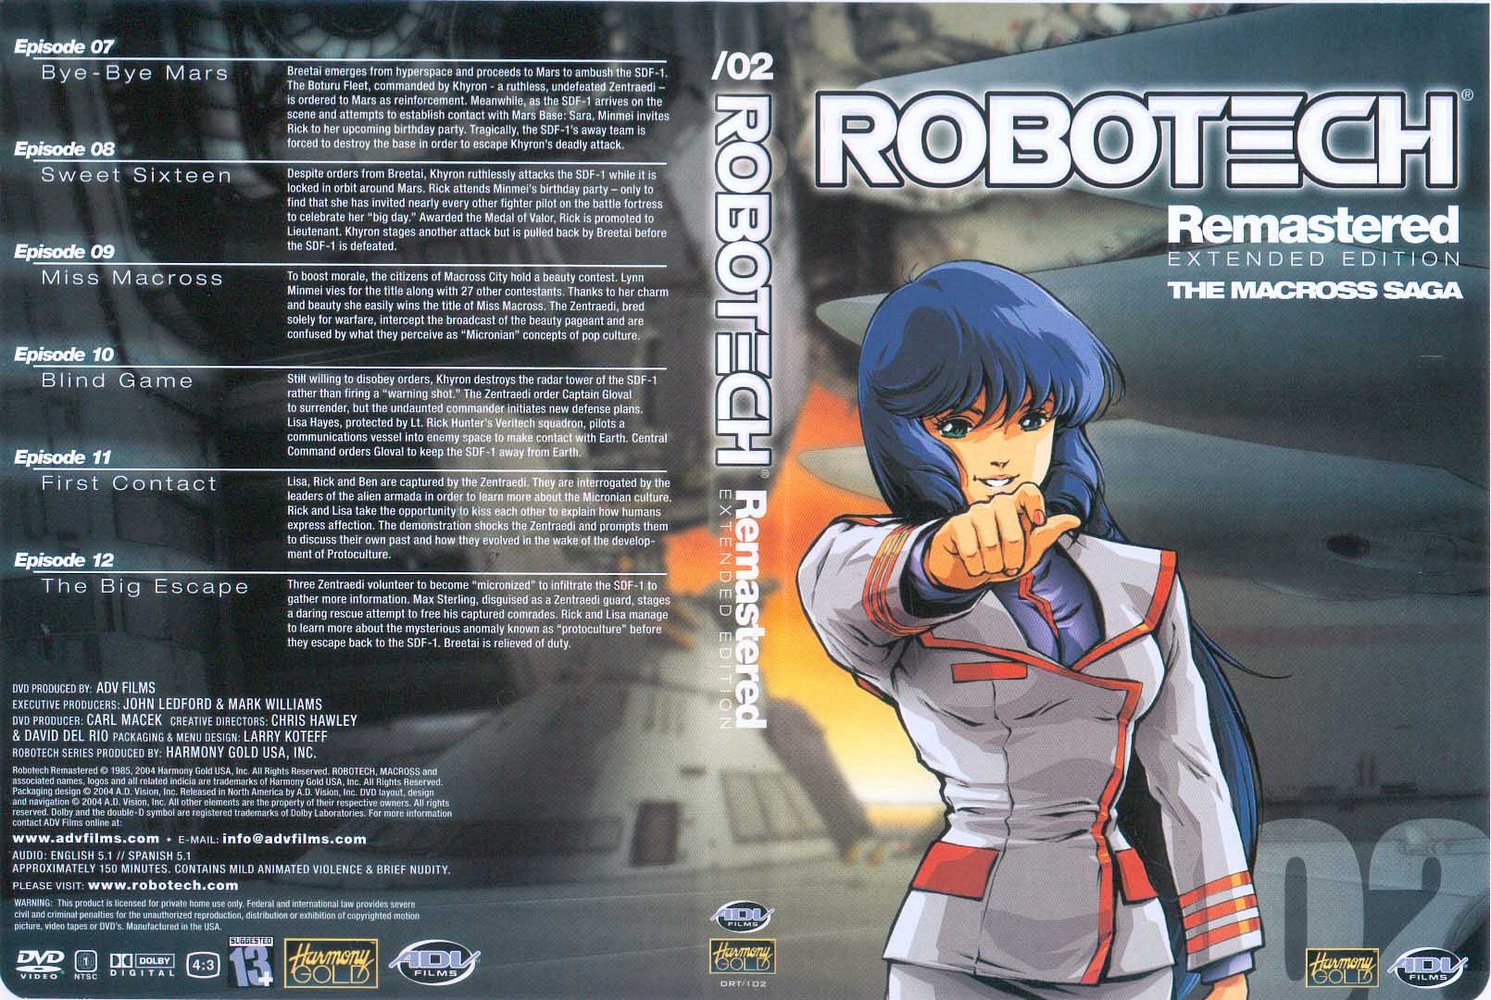 [Robotech_Remastered_Extended_Edition_Episodes_7-12-front.jpg]